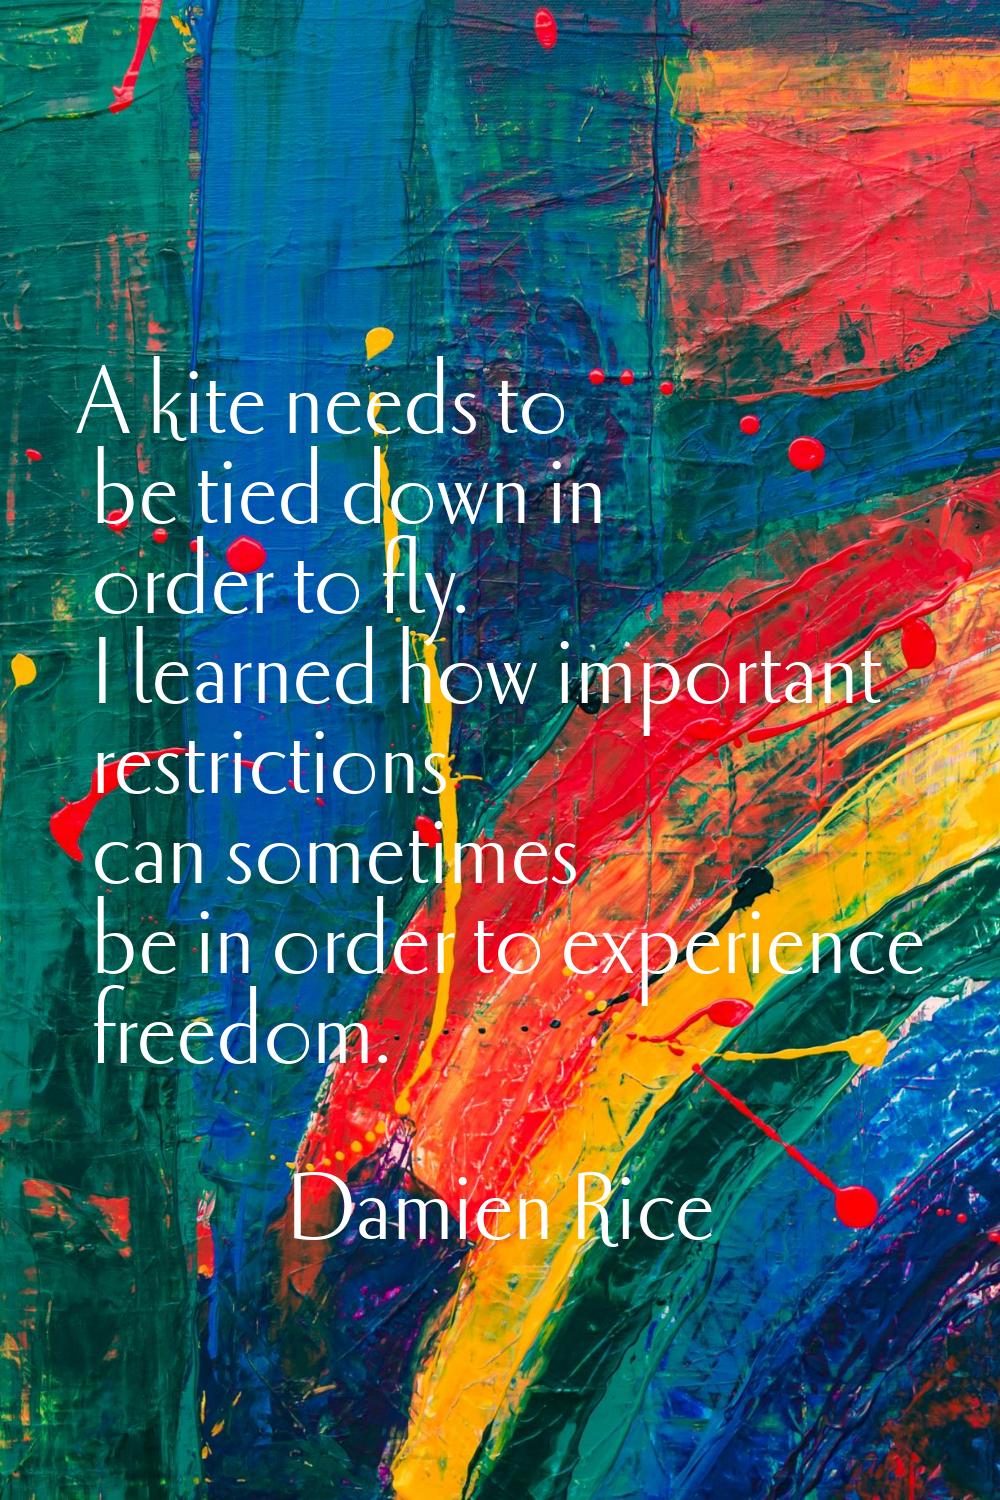 A kite needs to be tied down in order to fly. I learned how important restrictions can sometimes be